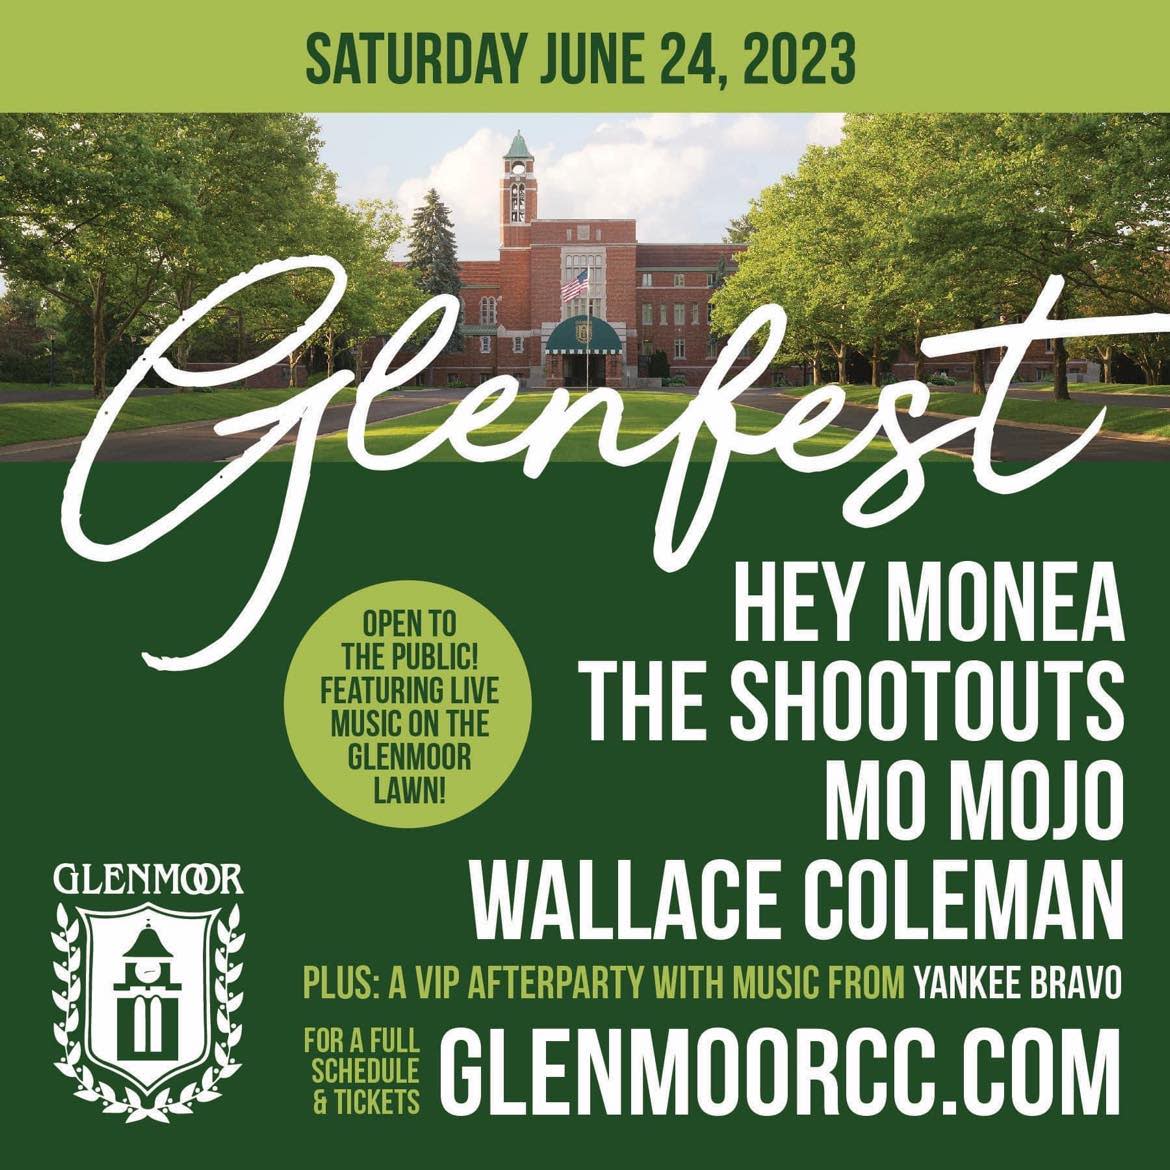 Glenfest is a new music event this summer at Glenmoor Country Club in Jackson Township. The June 24 festival features the bands Hey Monea and The Shootouts, as well as other musical acts.